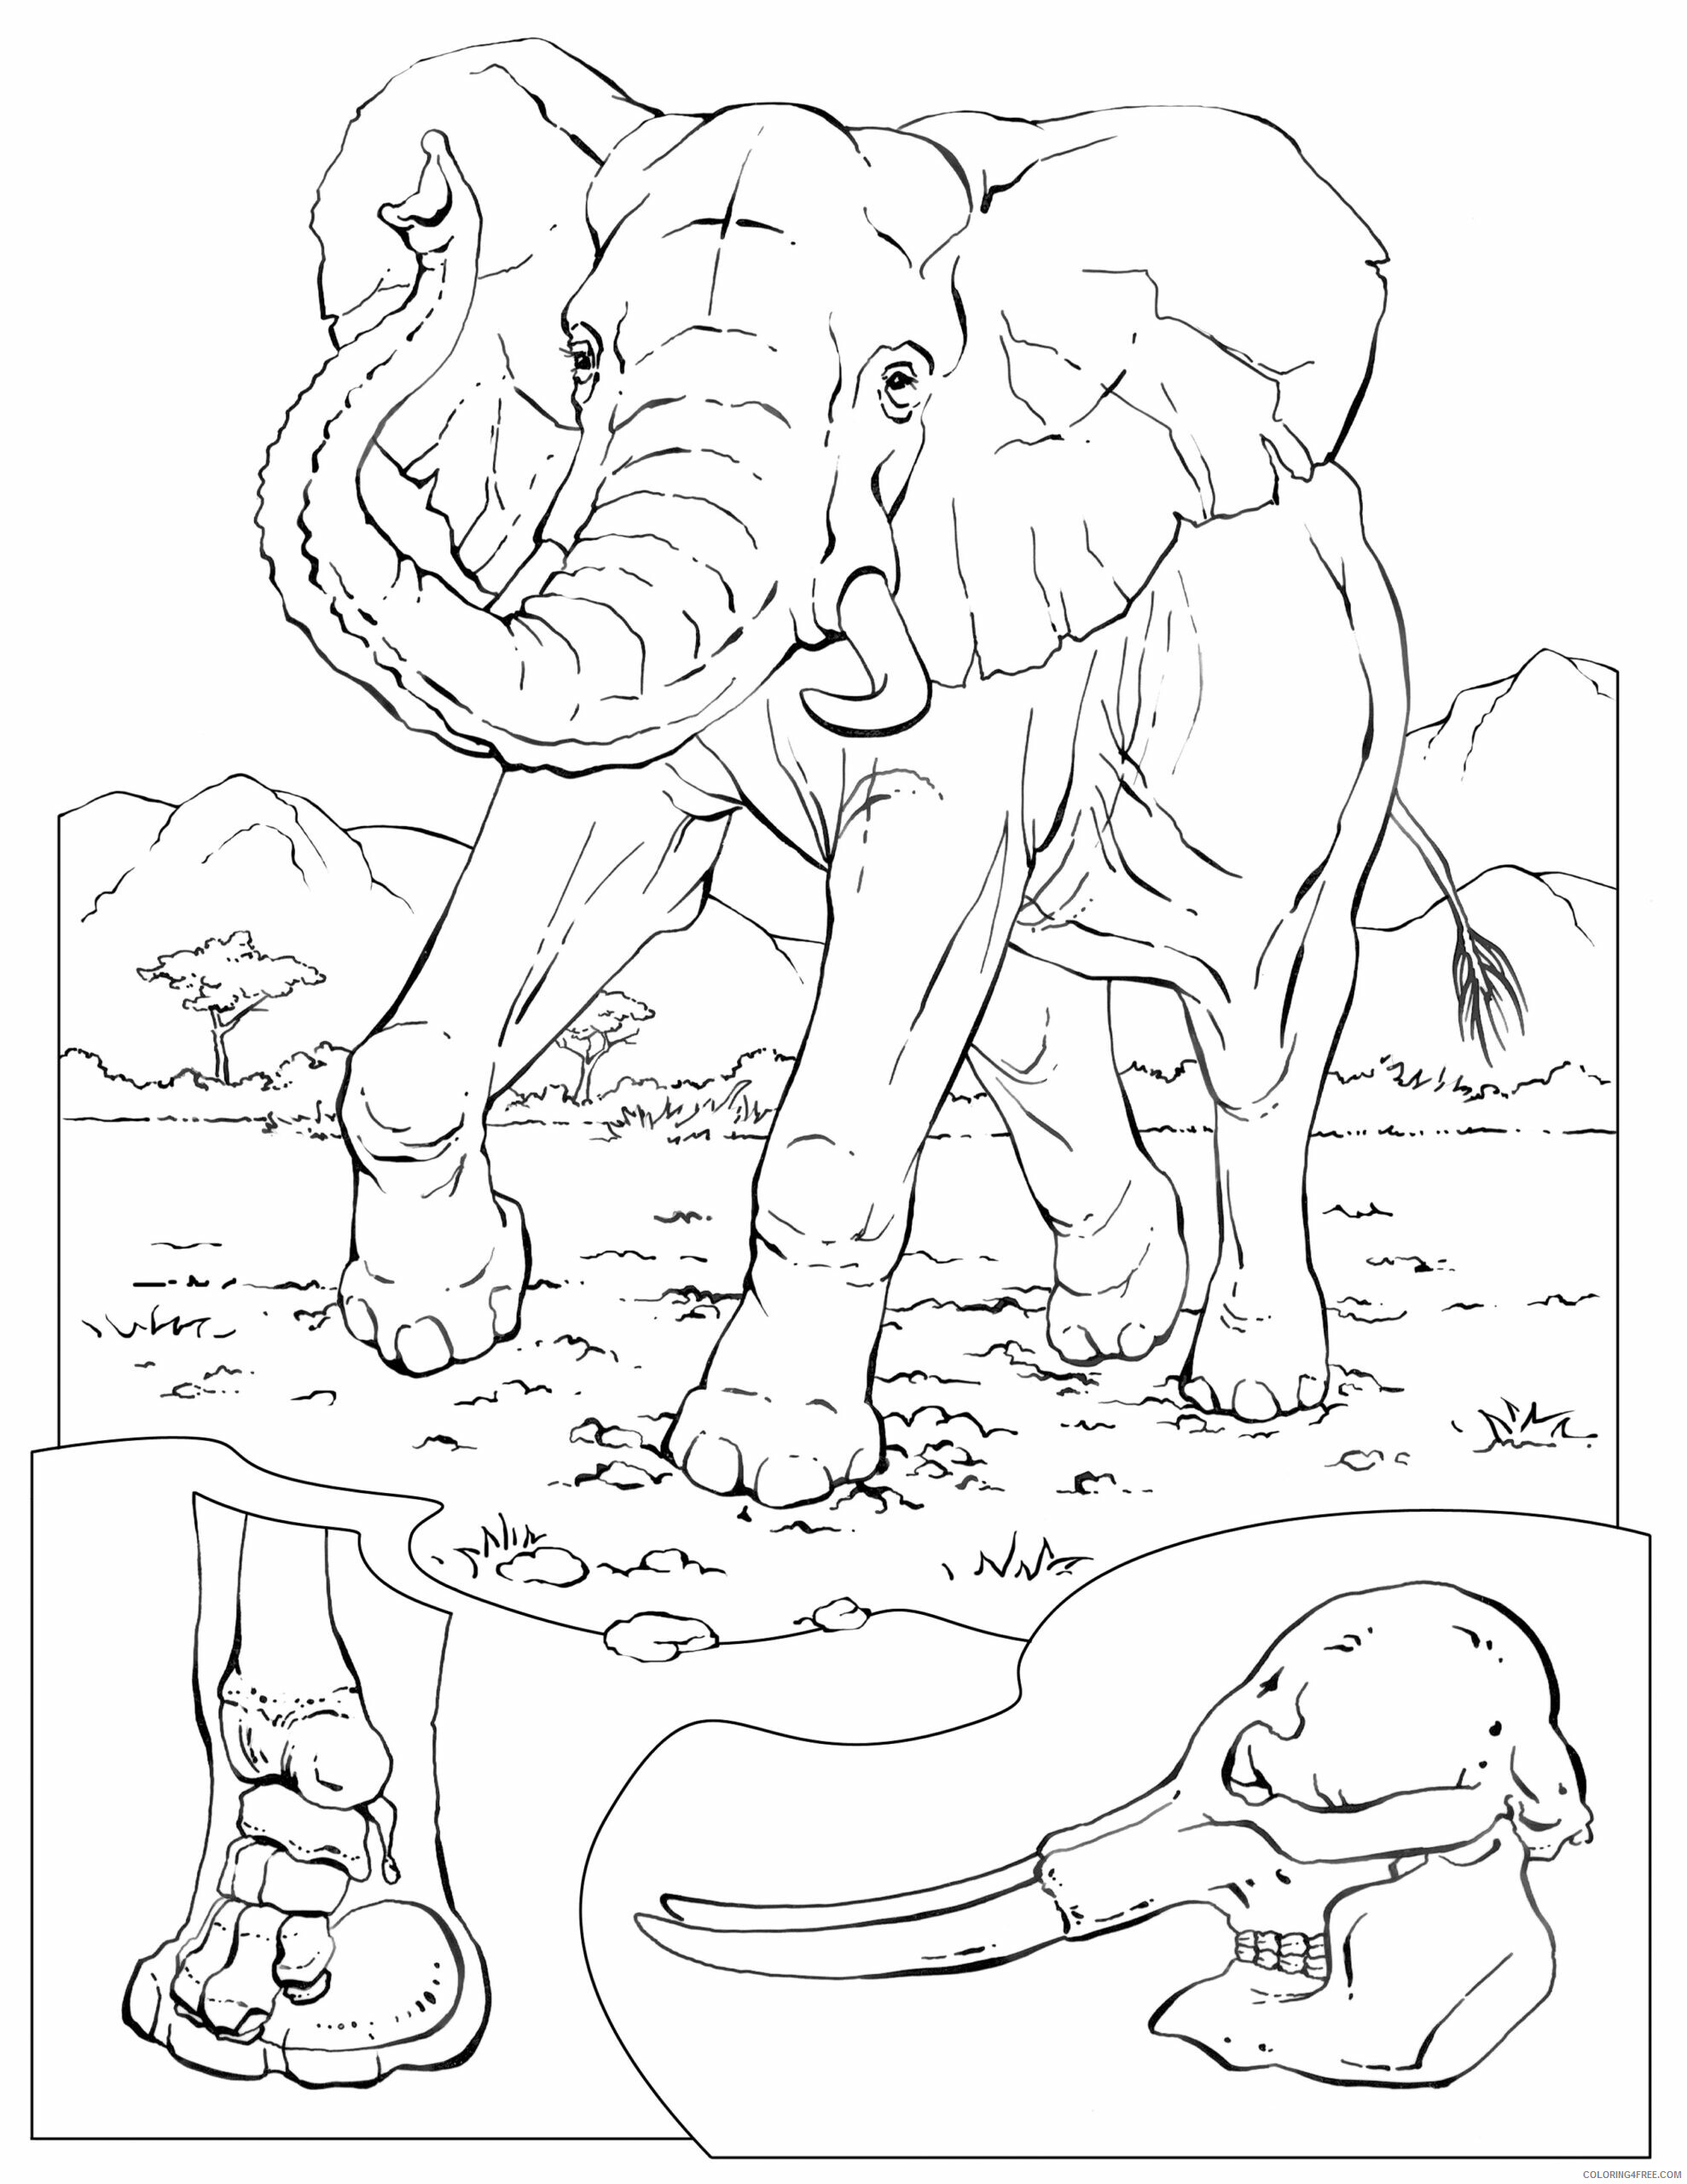 Preschool Animal Coloring Pages Elephant For Preschool Printable 2021 4851 Coloring4free